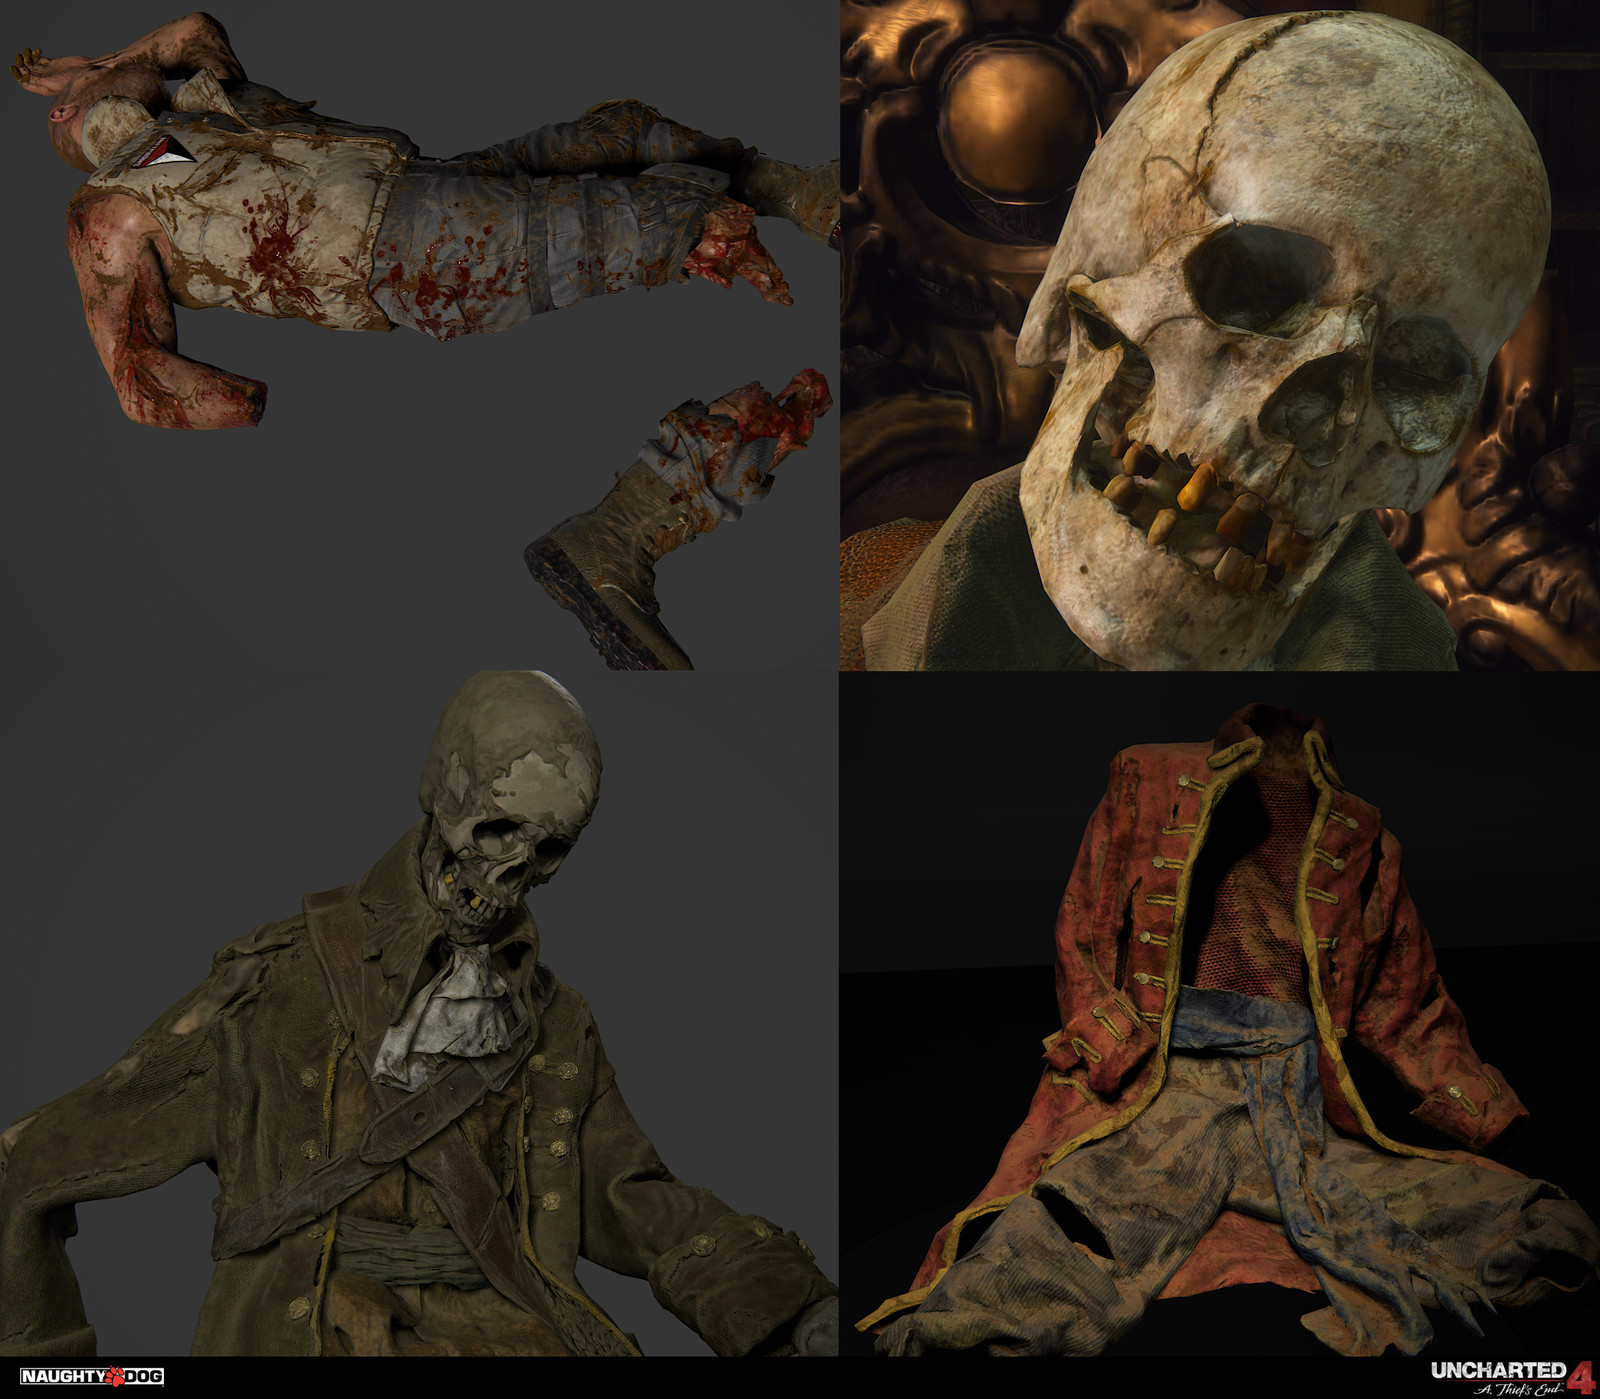 During the final push of the production, we got to help out with some background elements/characters. here is a few I re-textured and re-sculpted for the background team. The first one ended up being too gore for the game so we cover it up with rocks ;)